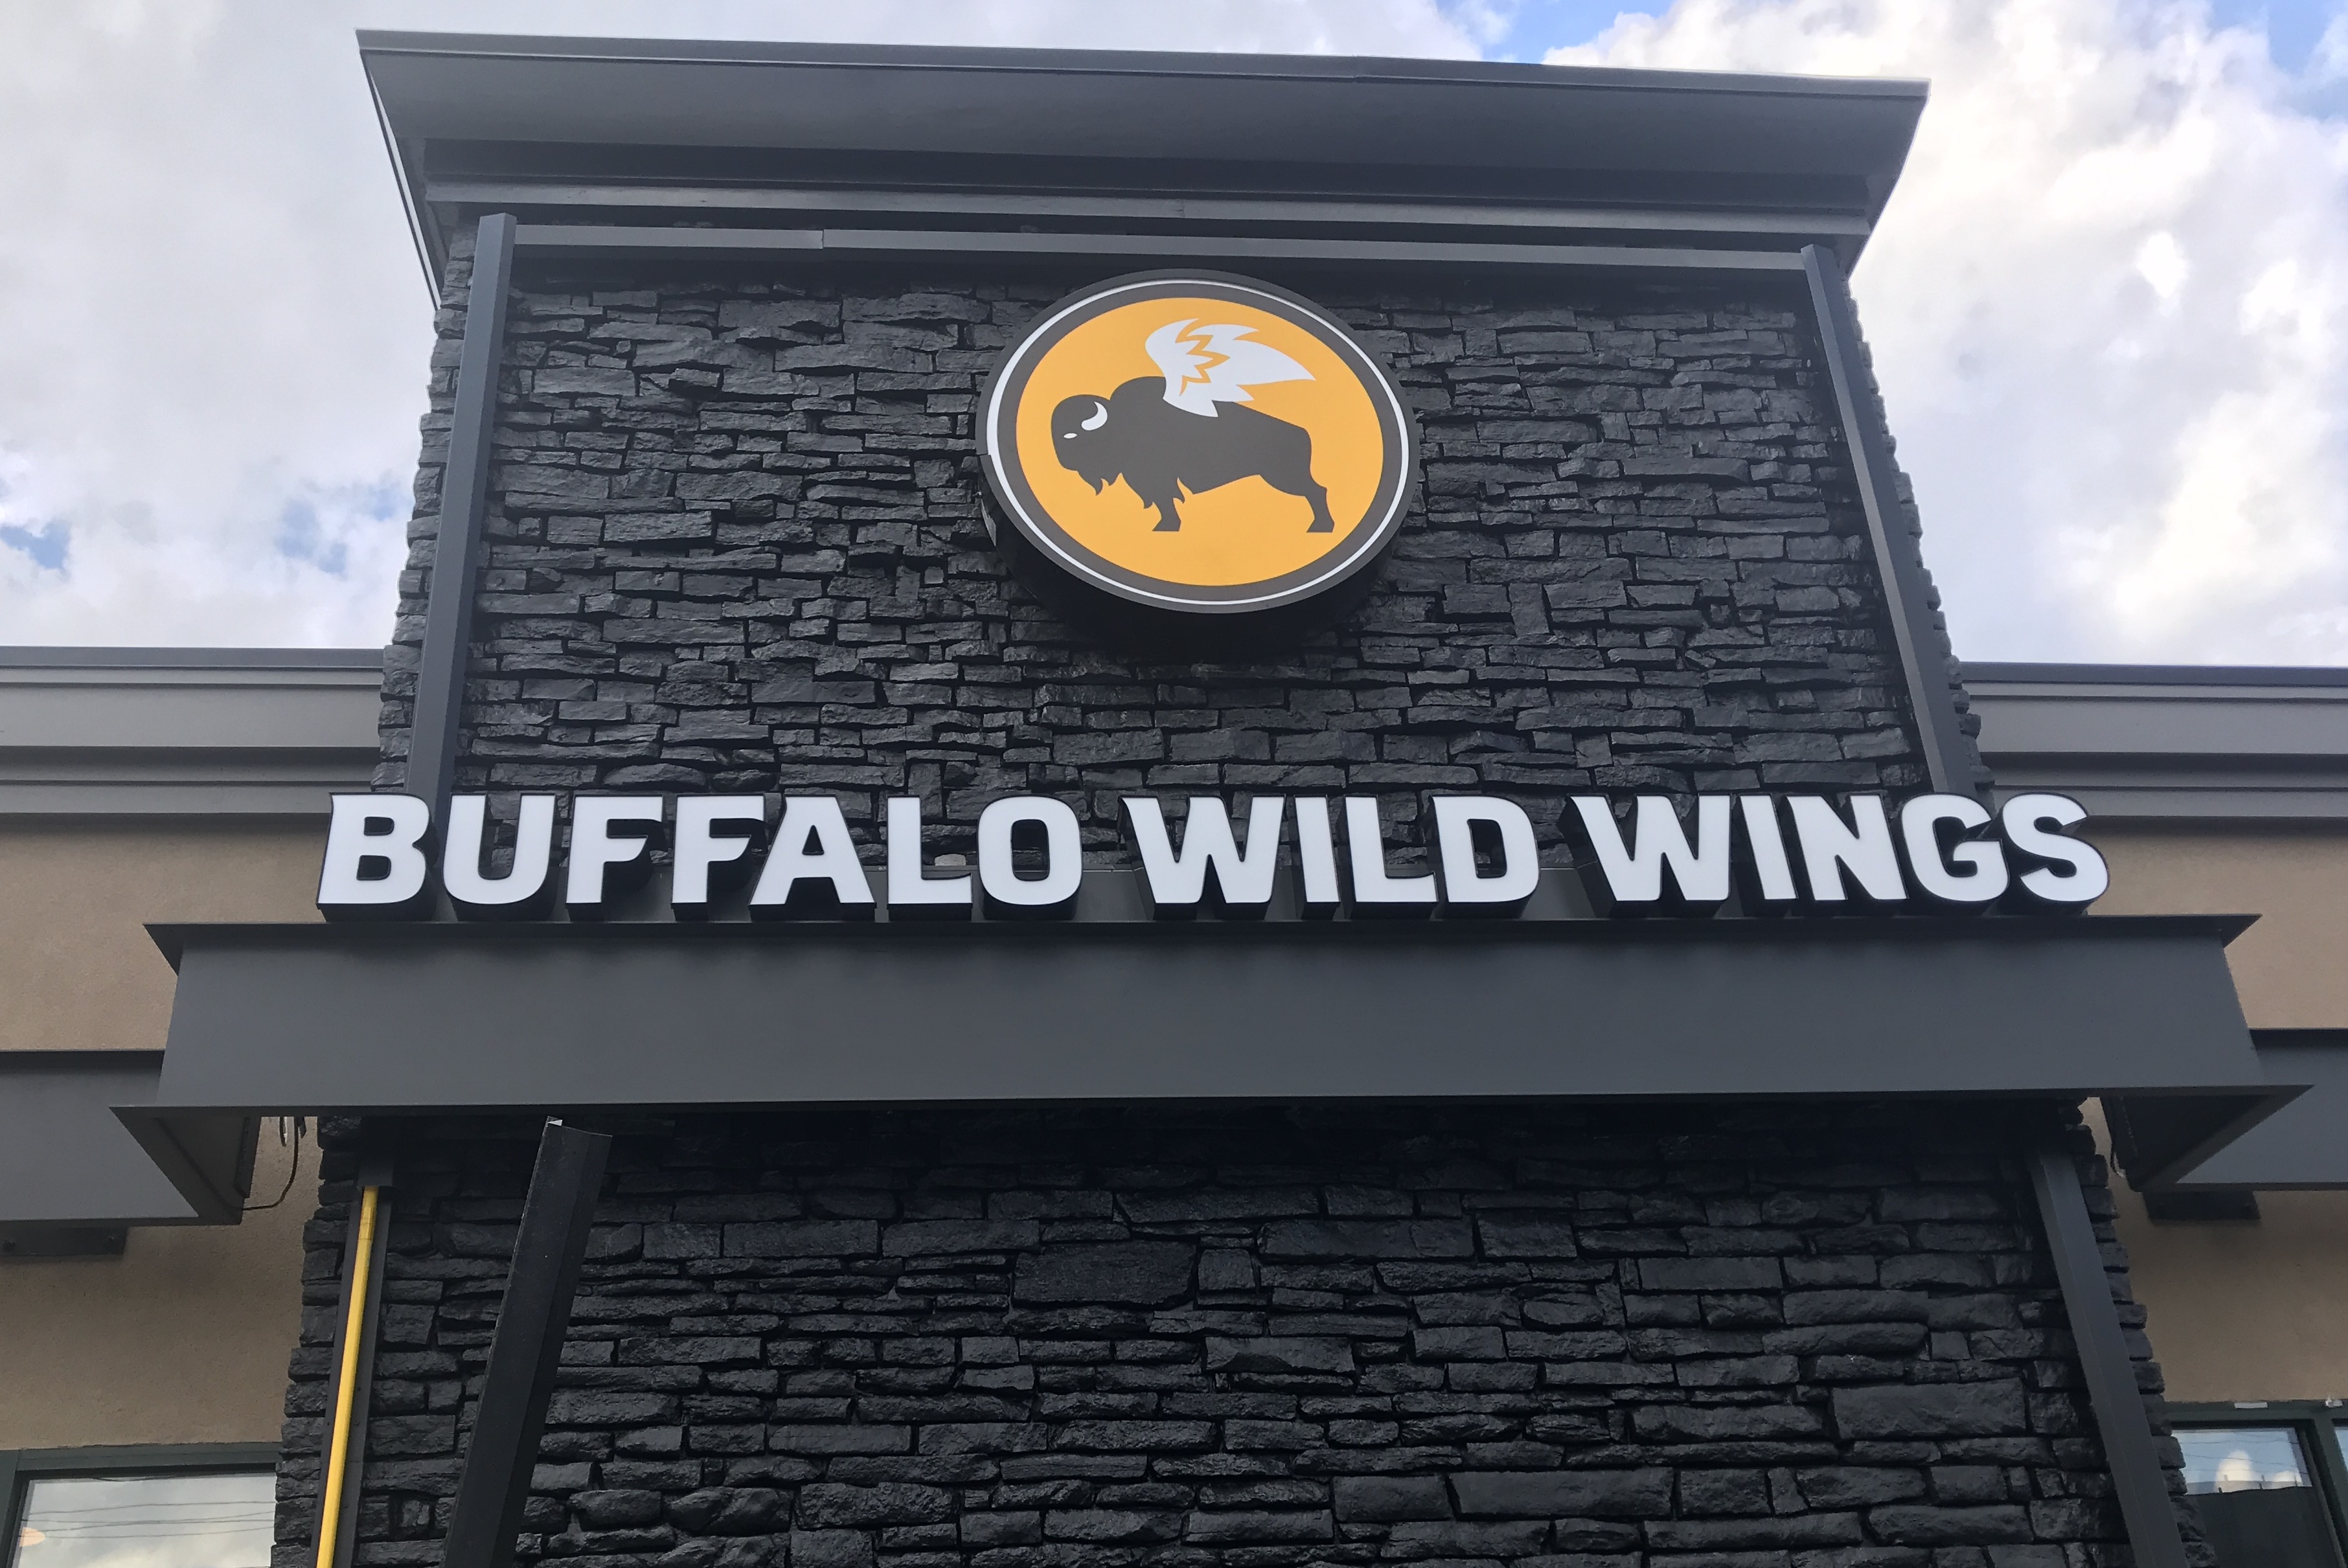 Goodbye Ruby Tuesday, hello Buffalo Wild Wings at new Lorain Road location in North Photos cleveland.com